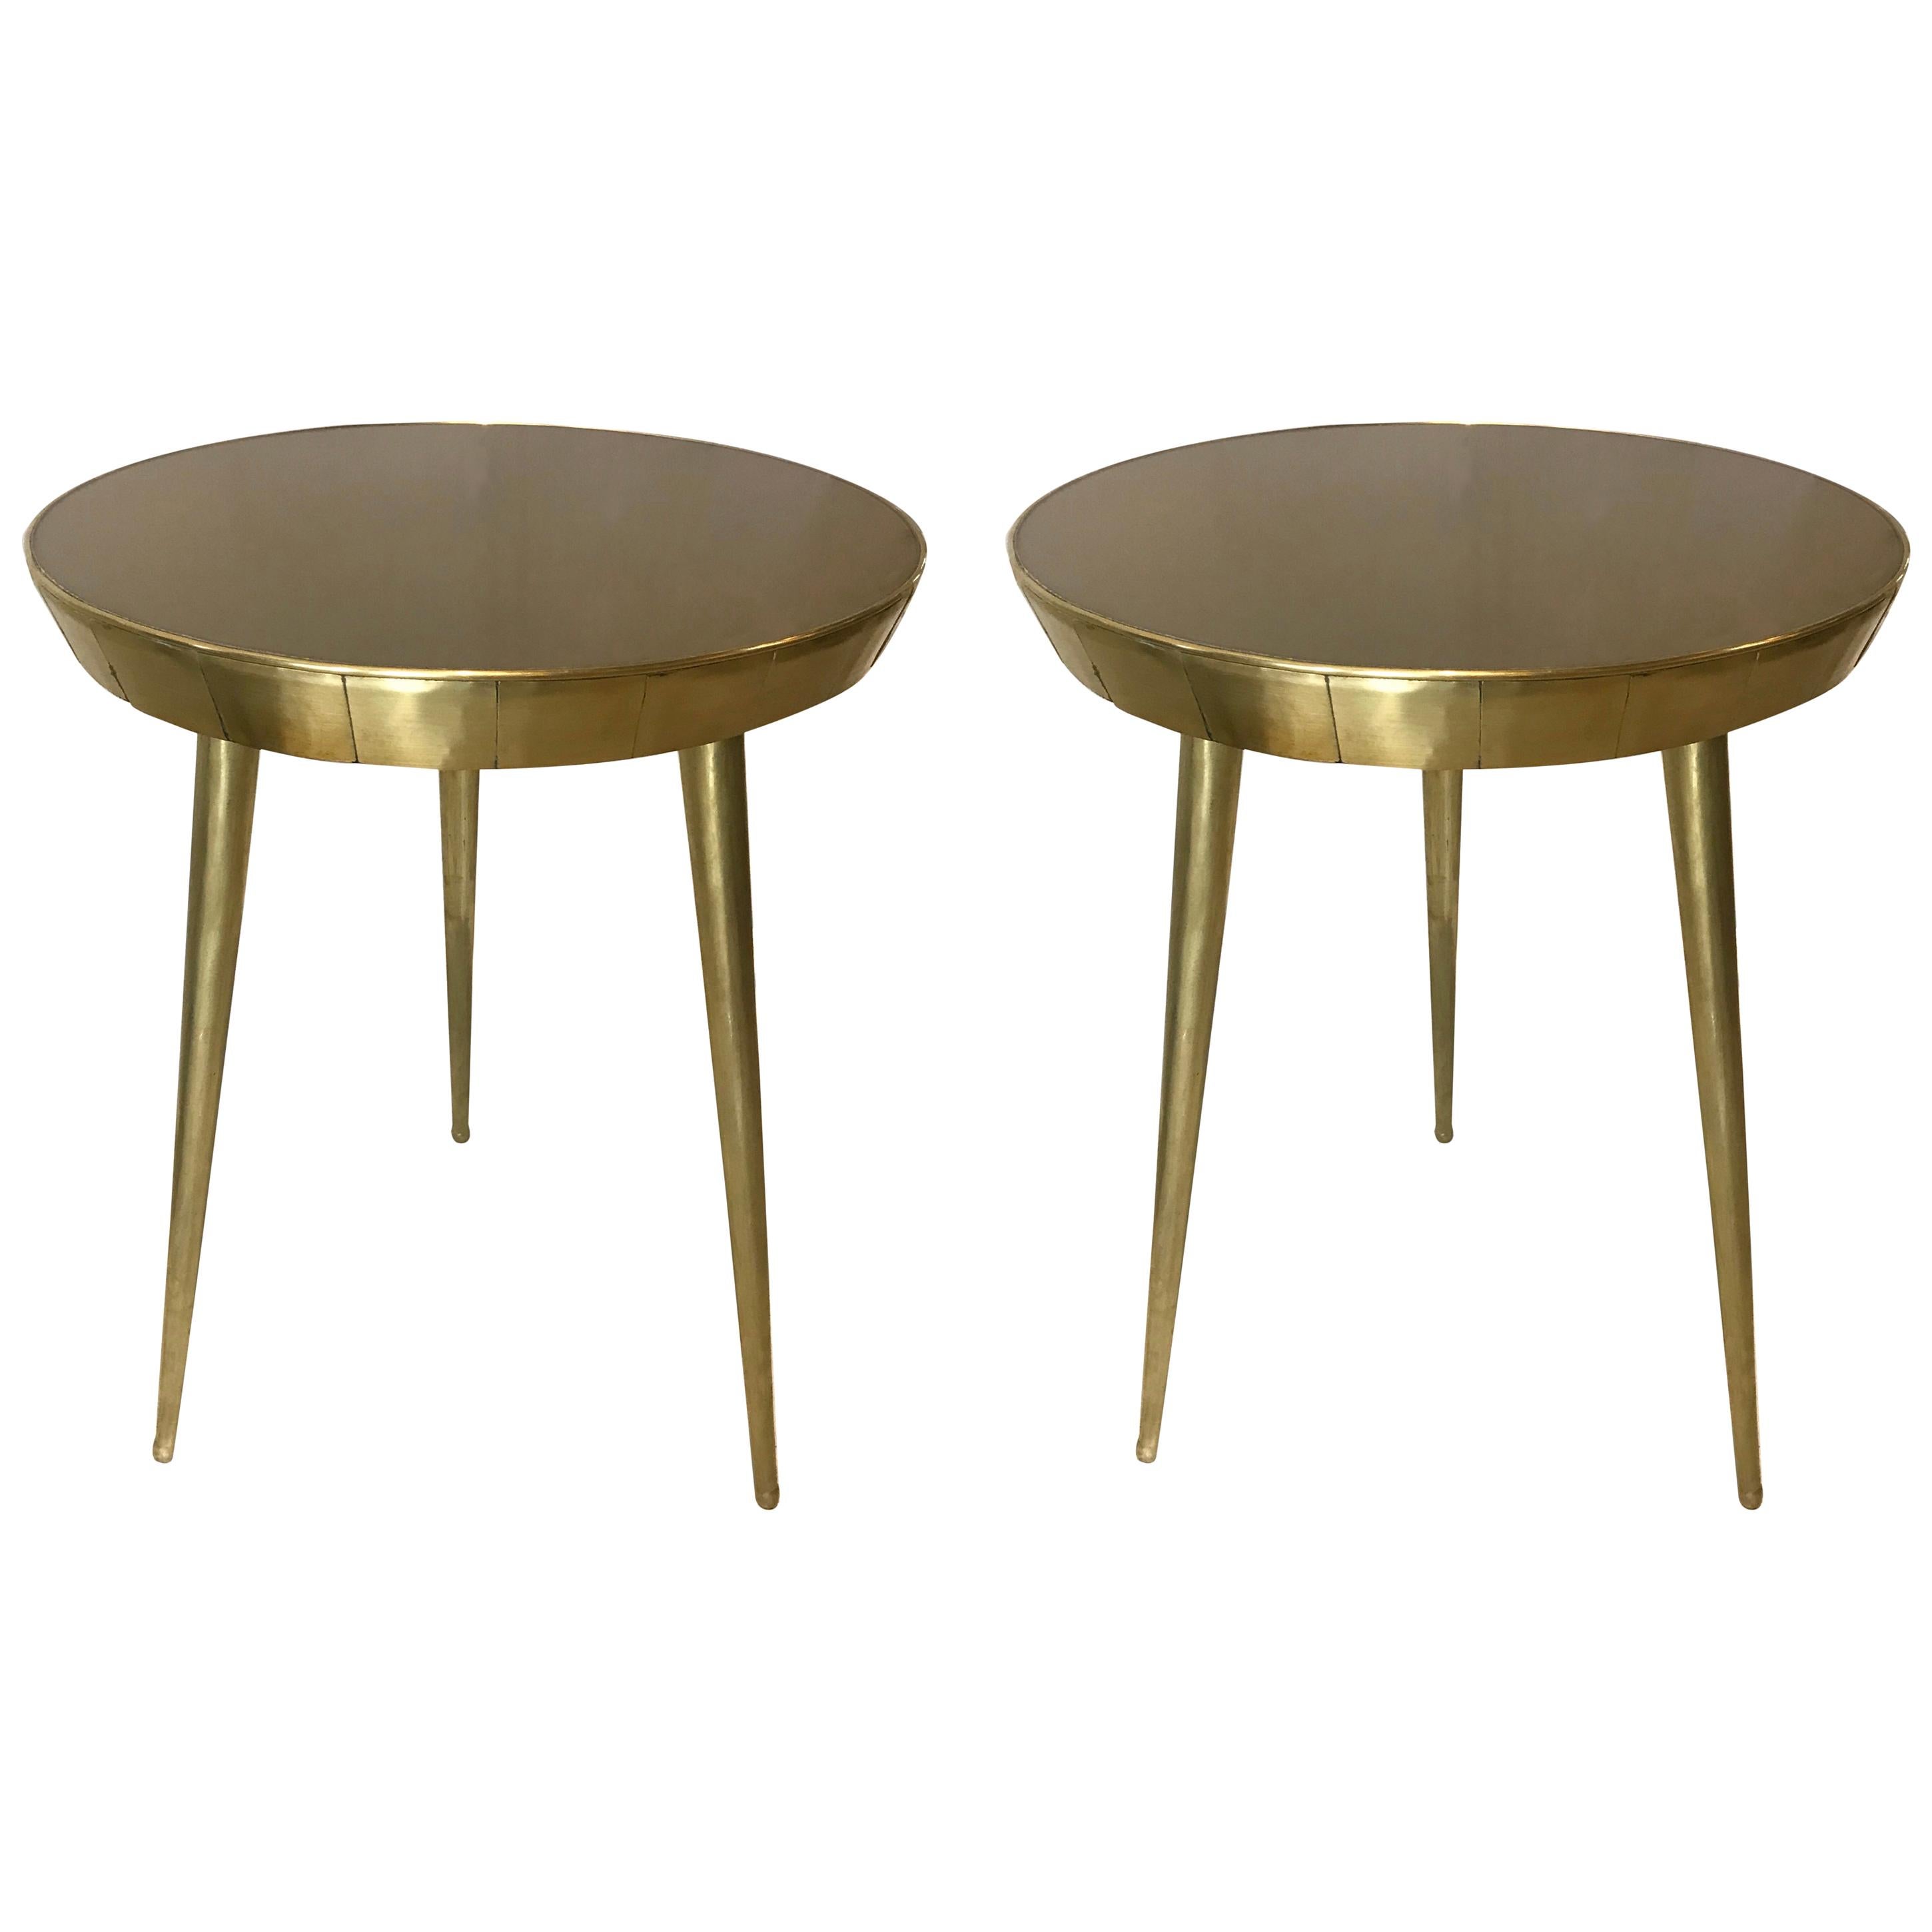 Pair of Italian Brass and Glass Accent Tables